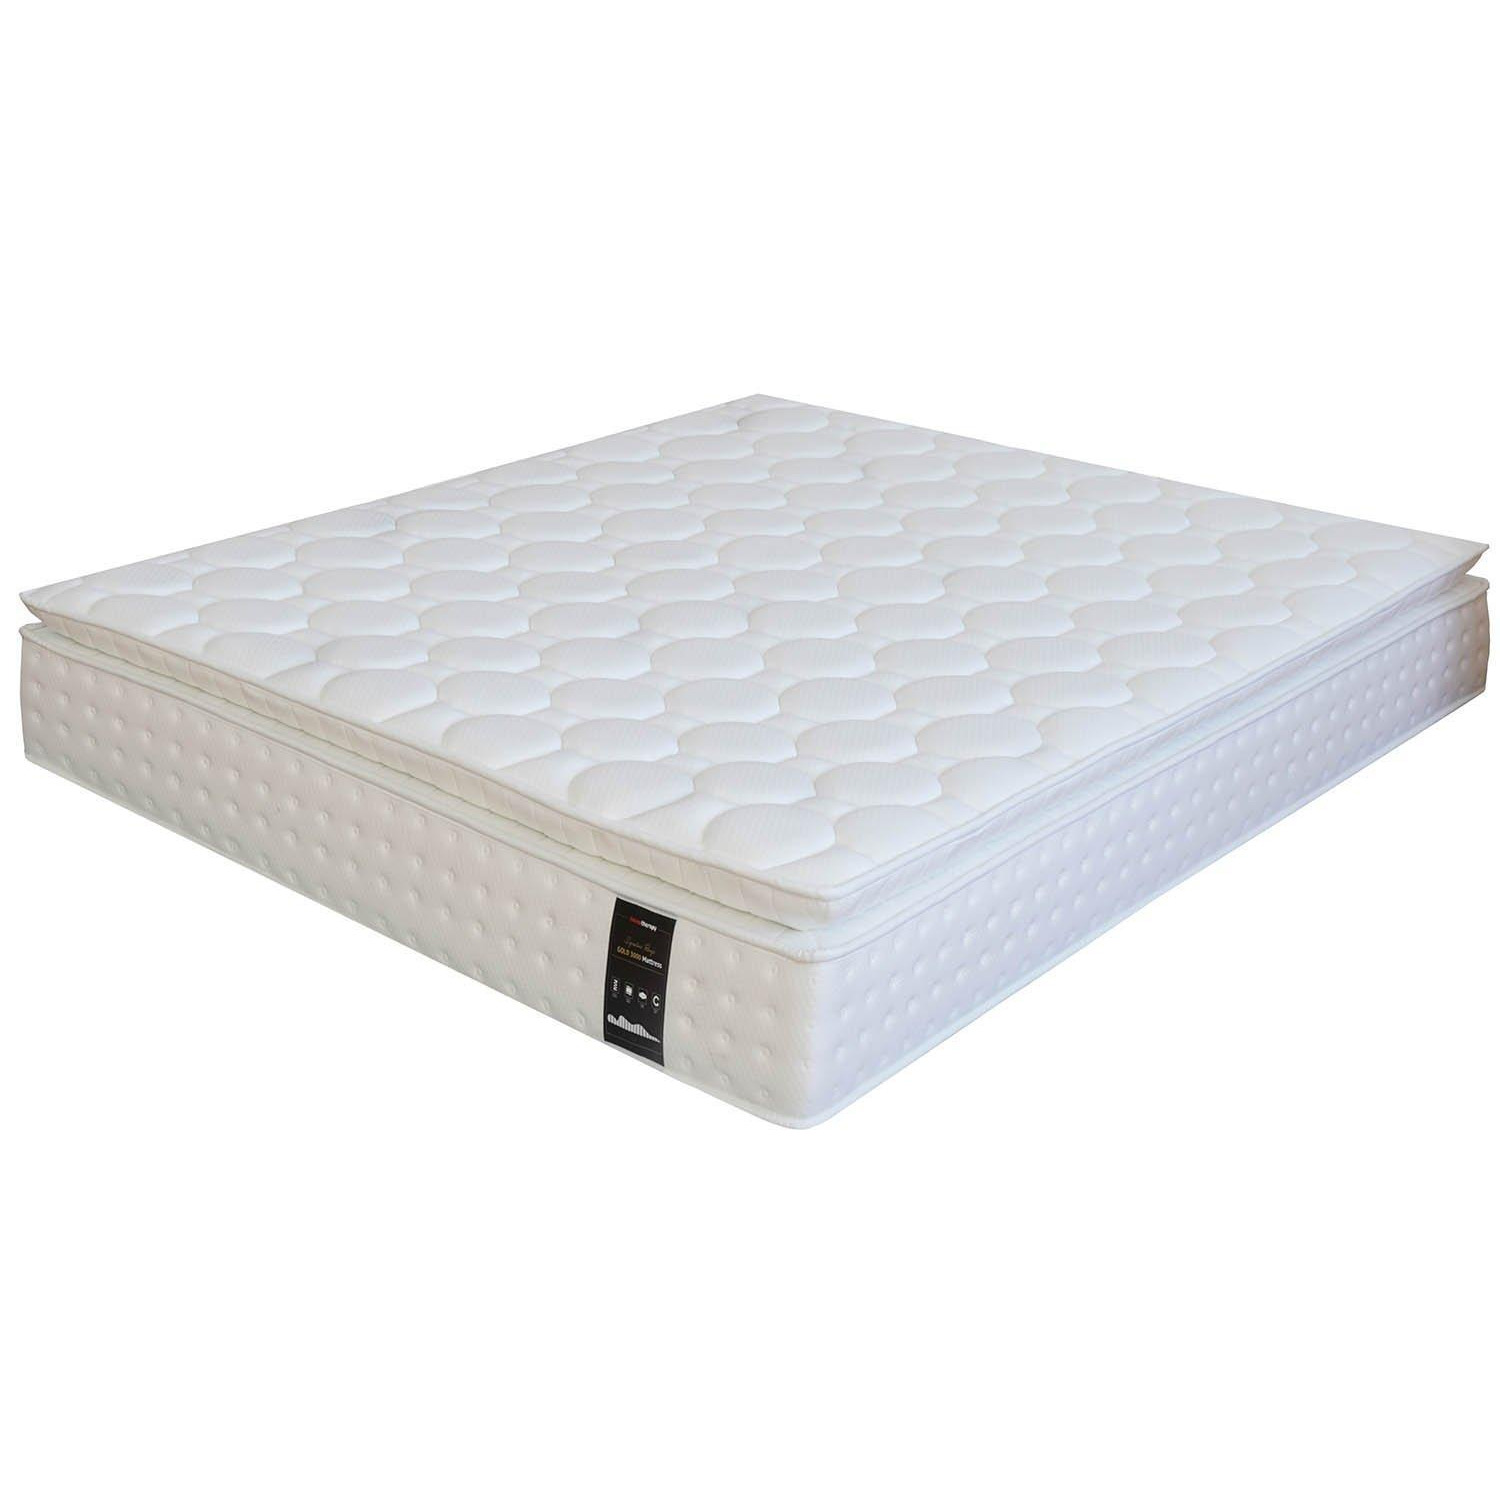 Gold 3000 5 Zone Foam Encapsulated Knitted Cover Pocket Spring Mattress - image 1